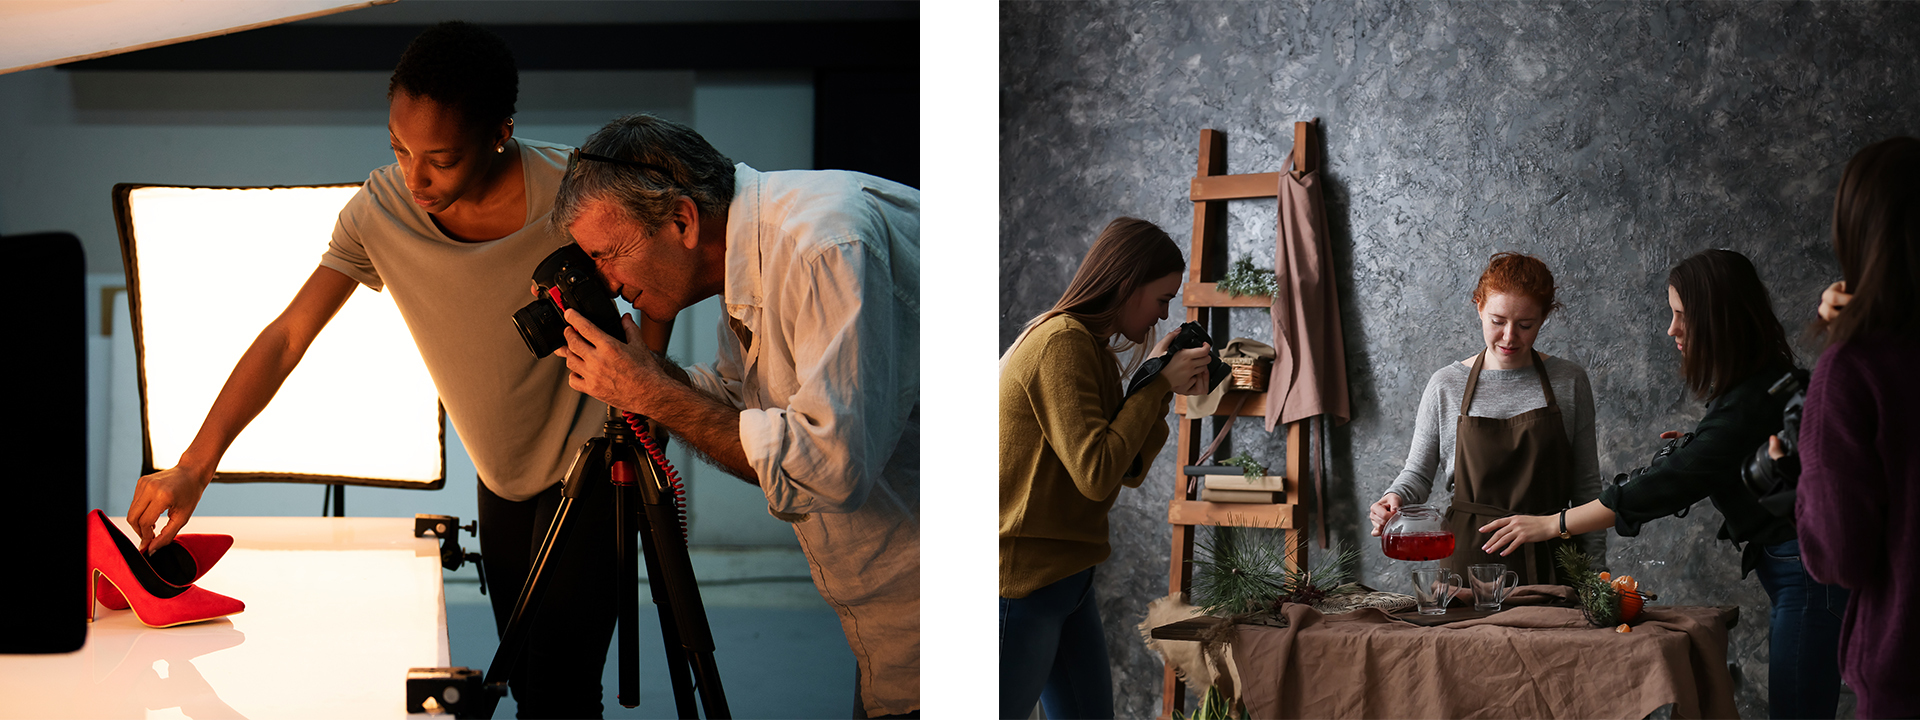 Professional Photographers Networking Tips: 7. You can plan photo shoots  together 